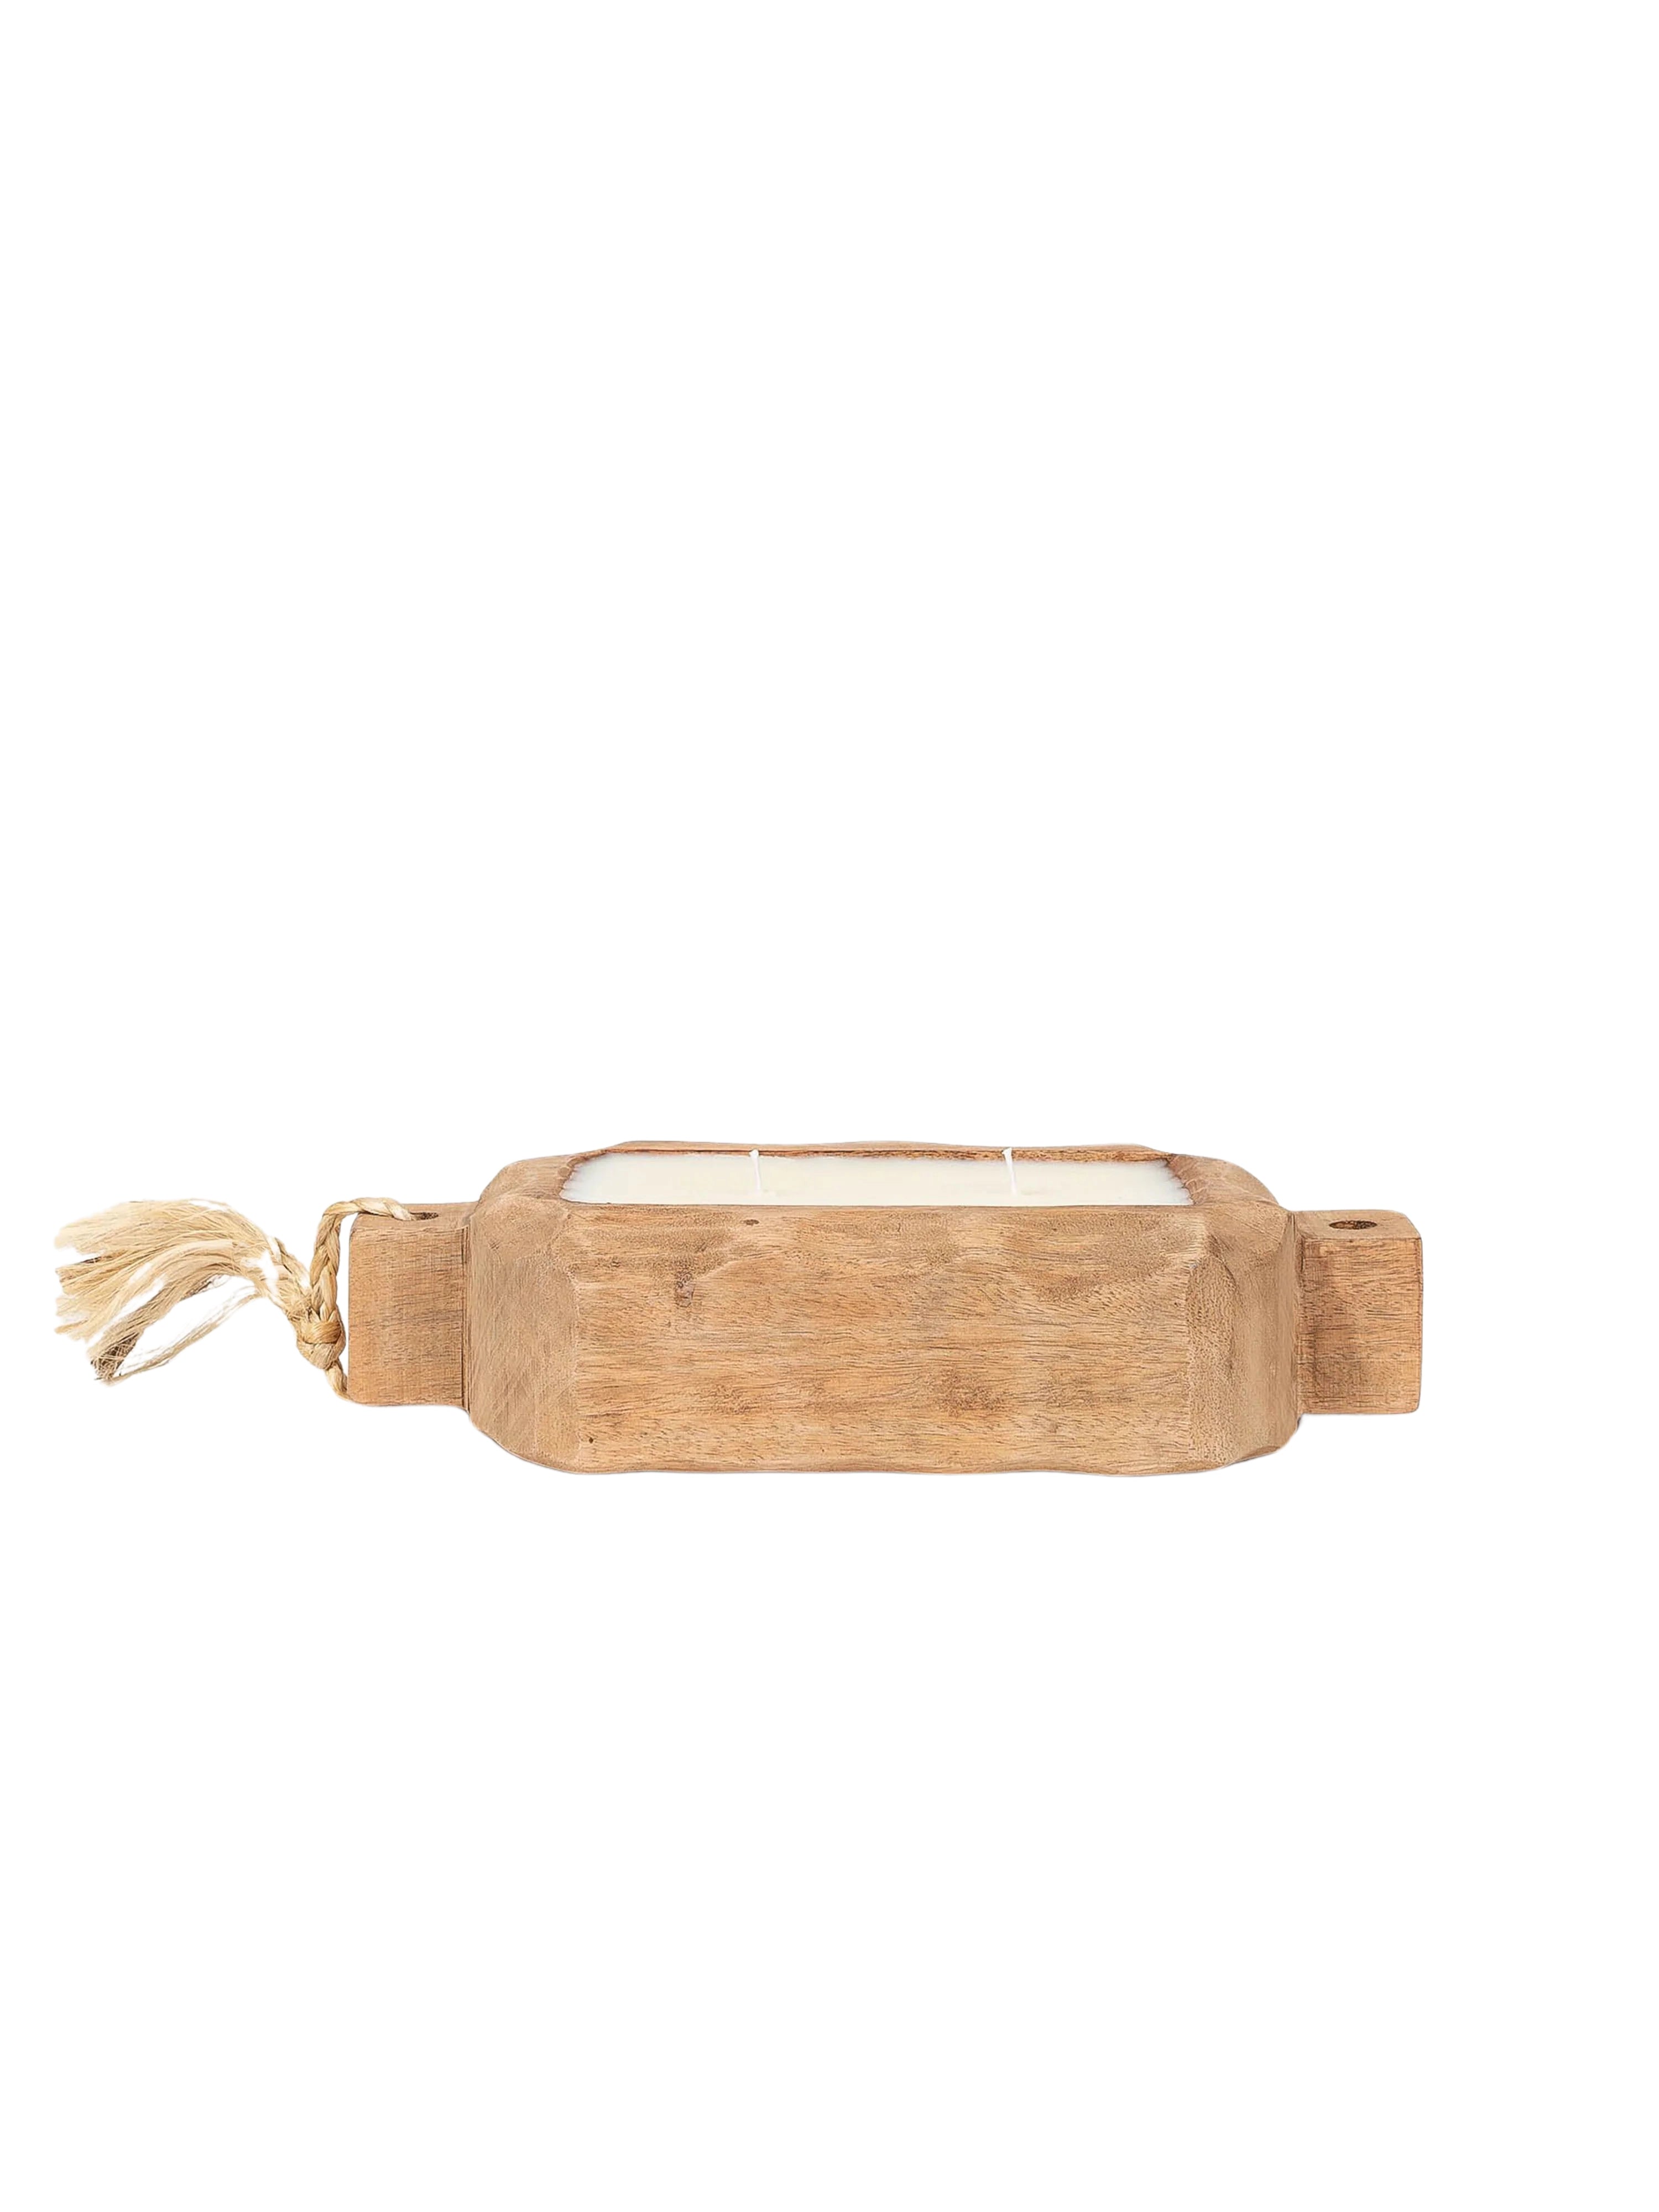 Small Driftwood Candle